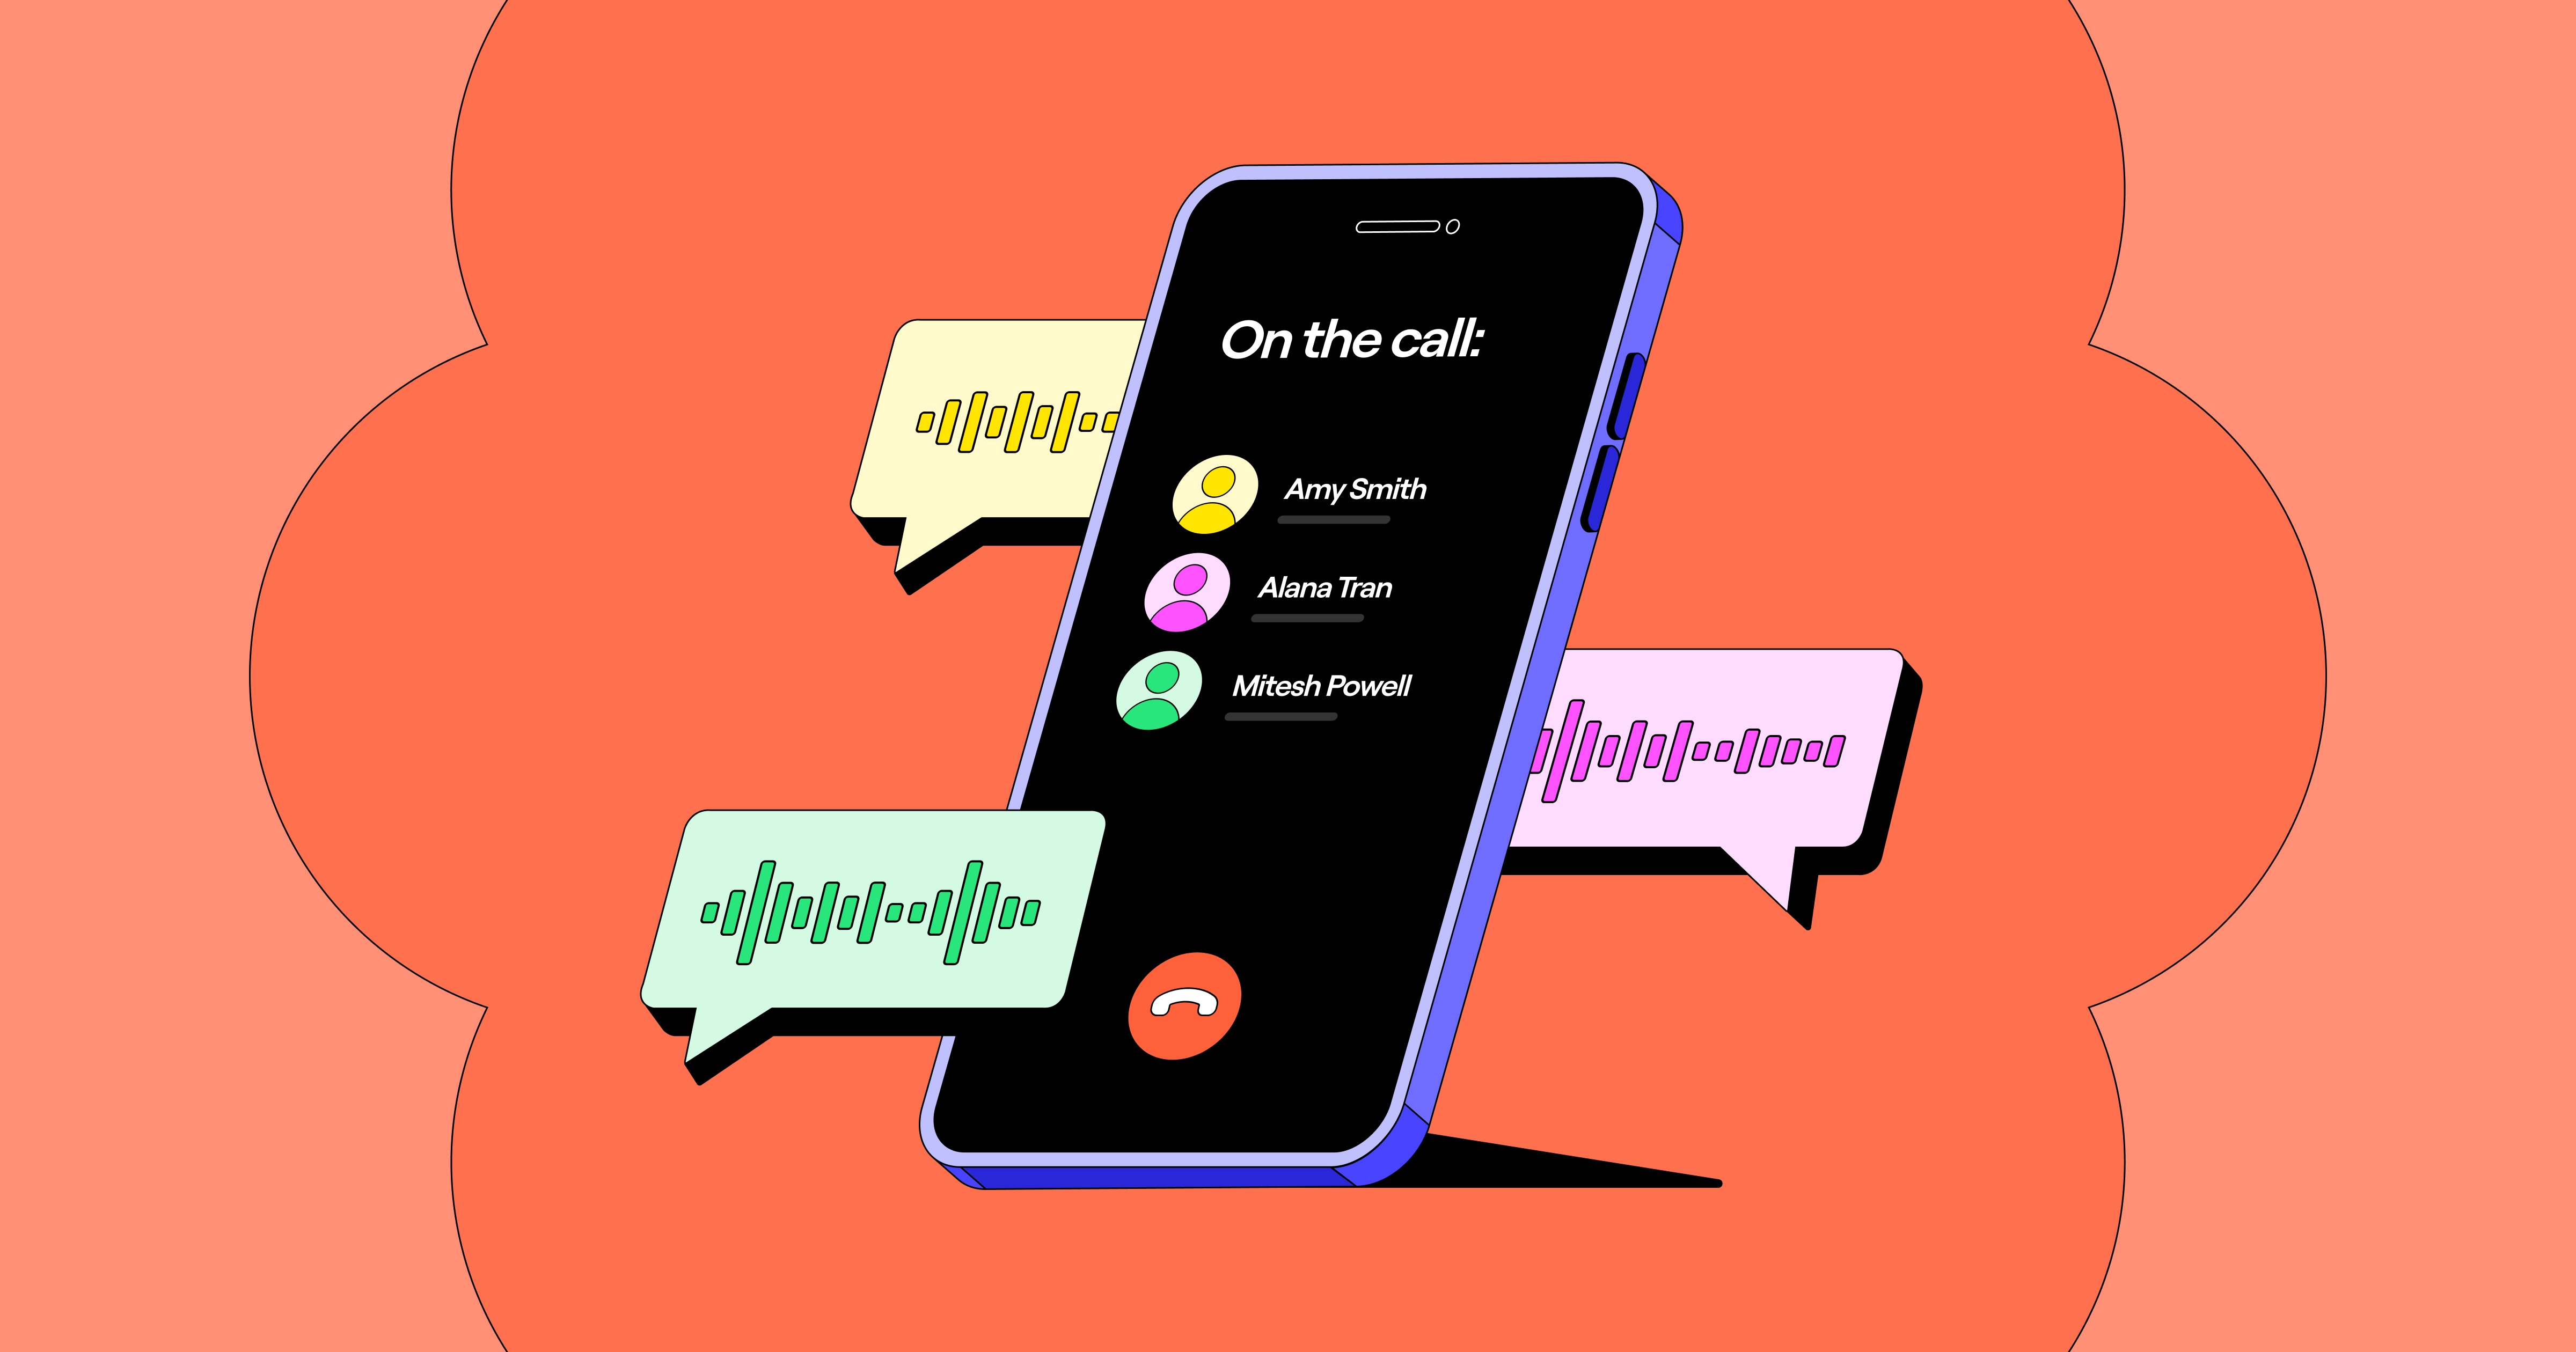 Line Chat and Video Voice Calling app (iPhone, Android, Windows